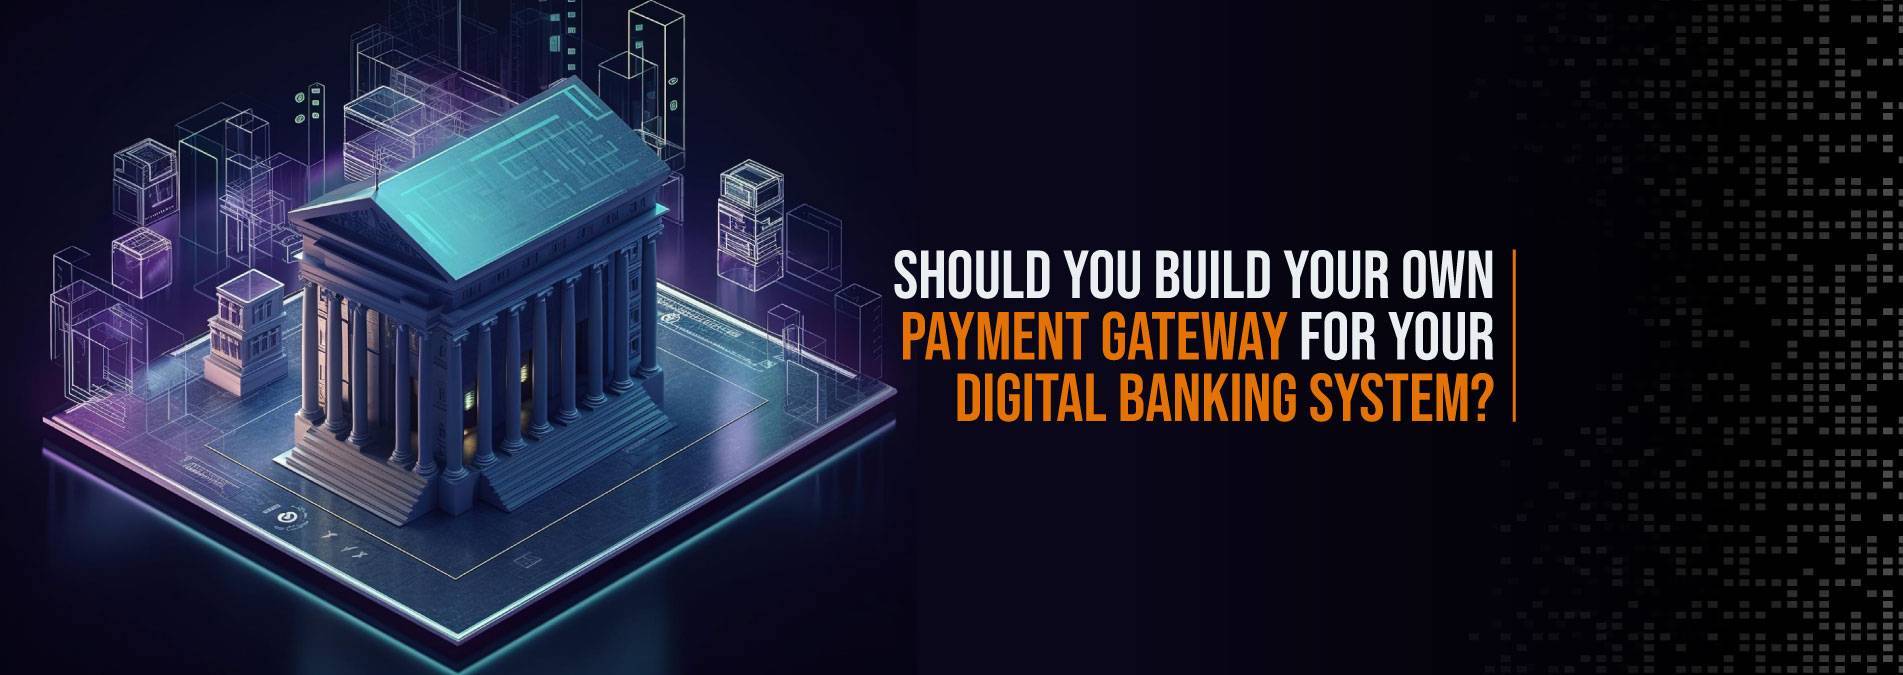 Should-You-Build-Your-Own-Payment-Gateway-for-Your-Digital-Banking-System